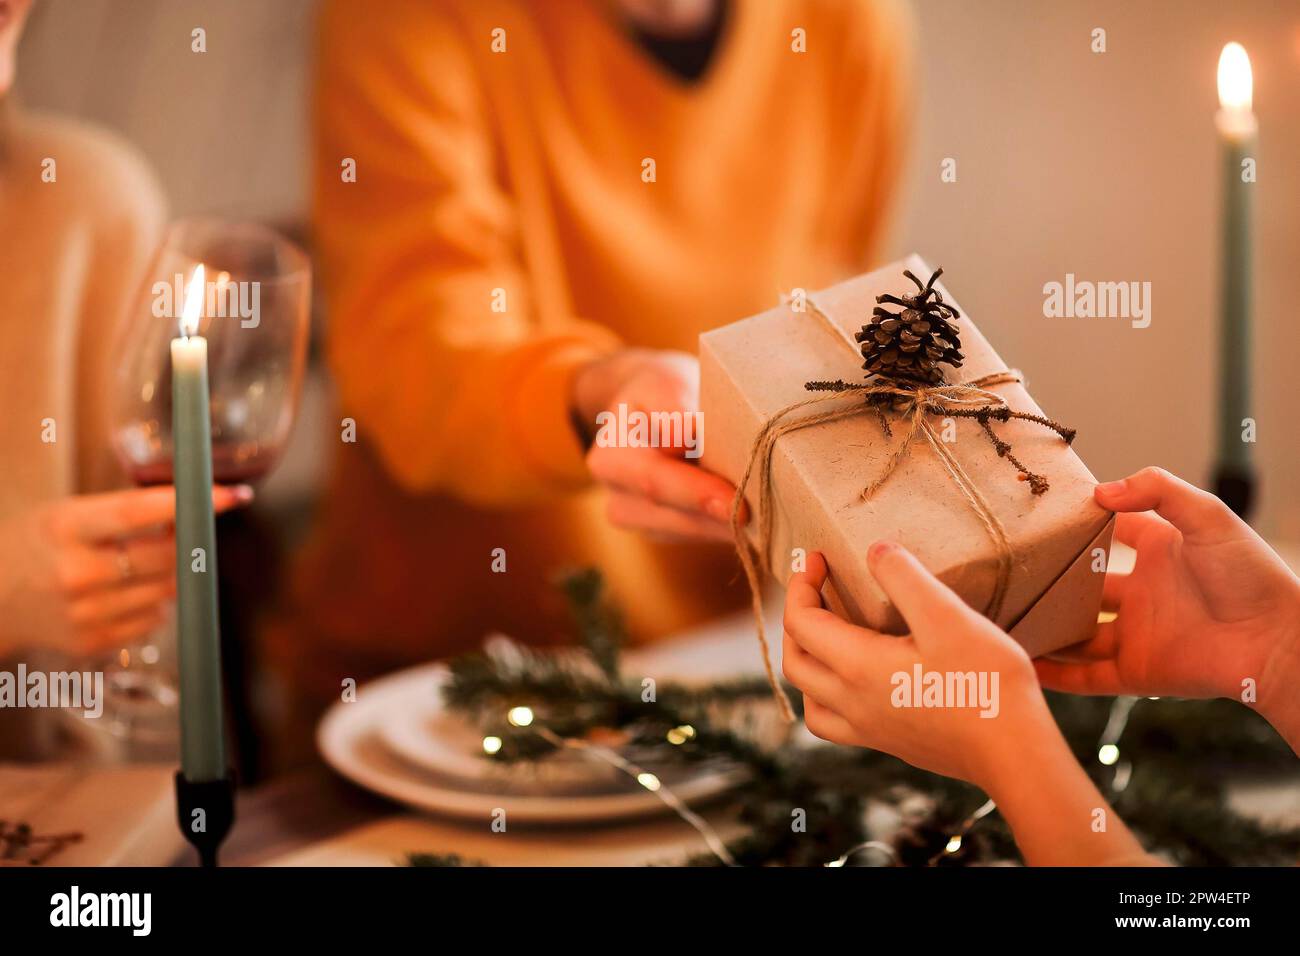 Soft focus of unrecognizable person giving wrapped gift to friend while sitting at table and celebrating Christmas together Stock Photo